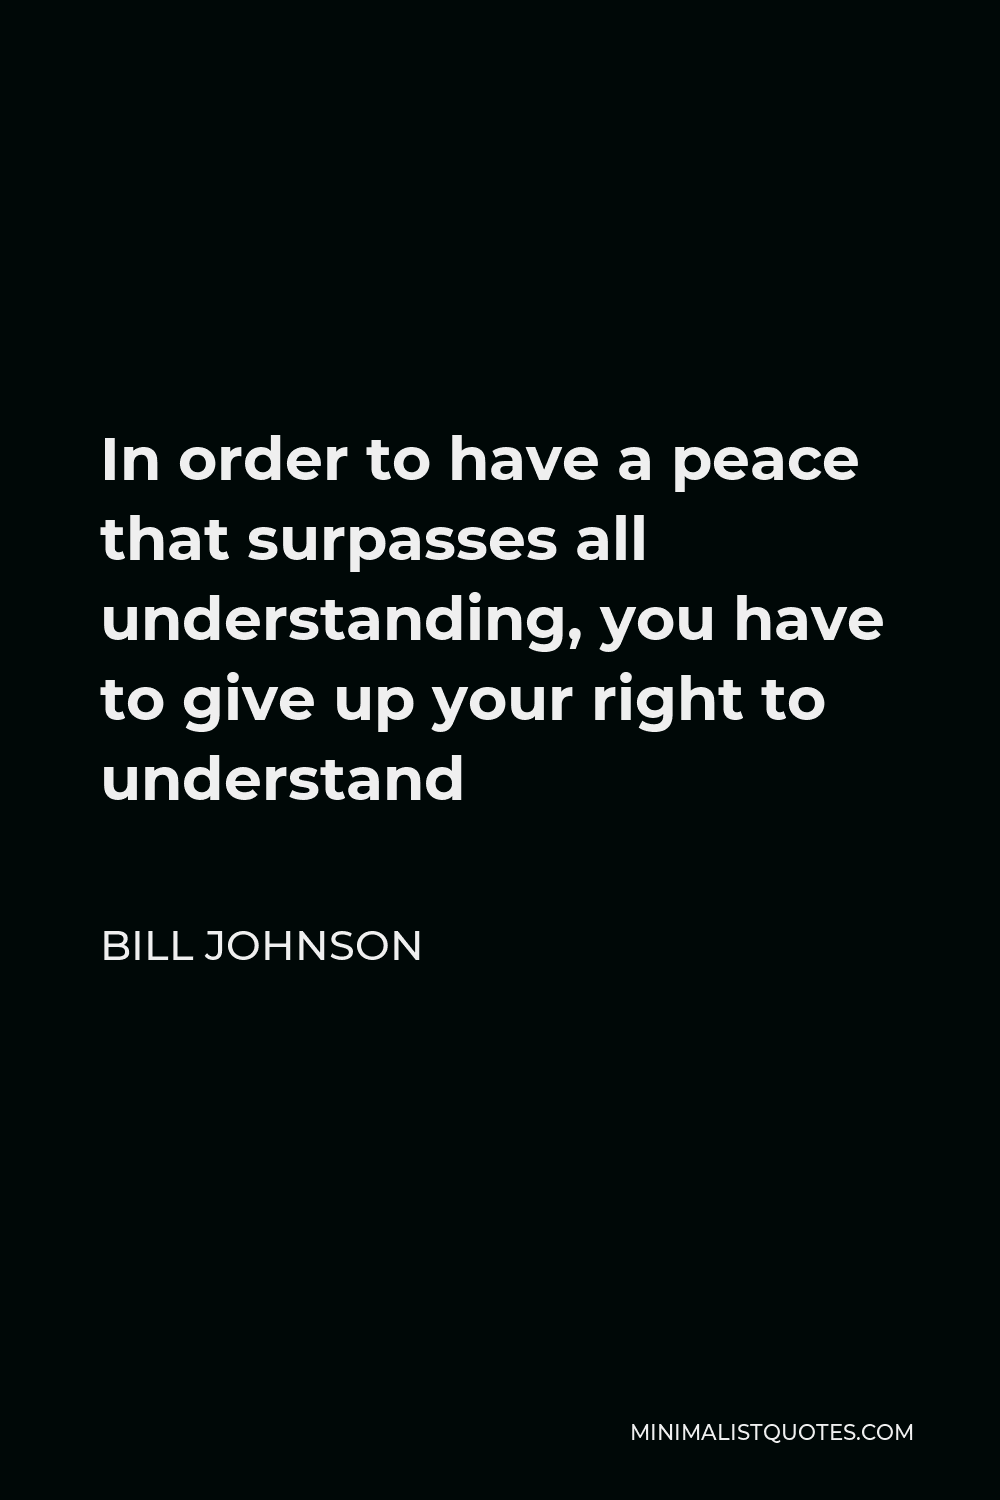 Bill Johnson Quote - In order to have a peace that surpasses all understanding, you have to give up your right to understand